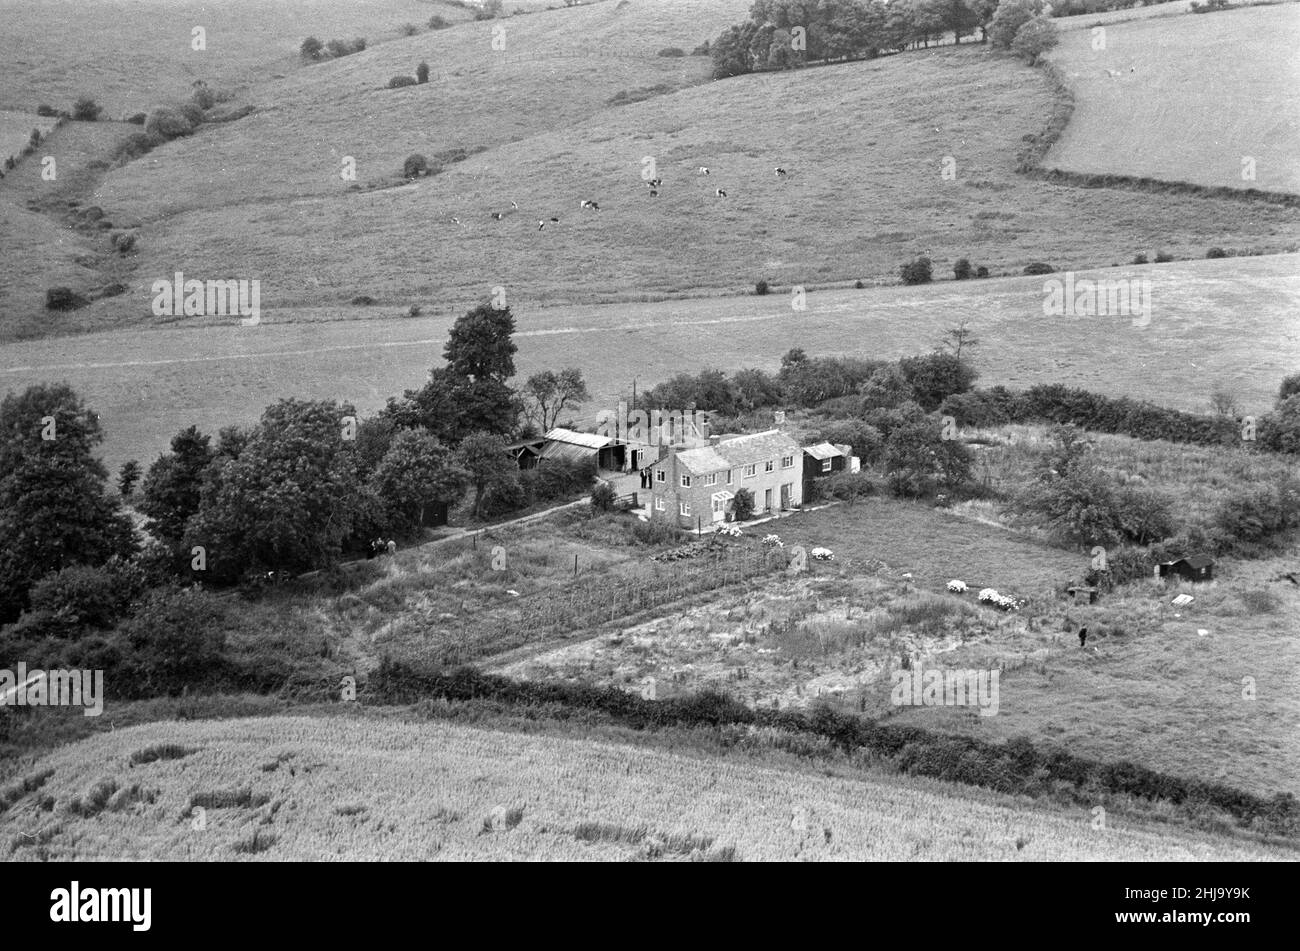 Leatherslade Farm, between Oakley and Brill in Buckinghamshire, hideout used by gang, 27 miles from the crime scene, Tuesday 13th August 1963. Our Picture Shows ... aerial view remote farmhouse in Buckinghamshire countryside, used as hideaway by gang in immediate aftermath of robbery.   The 1963 Great Train Robbery was the robbery of 2.6 million pounds from a Royal Mail train heading from Glasgow to London on the West Coast Main Line in the early hours of 8th August 1963, at Bridego Railway Bridge, Ledburn, near Mentmore in  Buckinghamshire, England. Stock Photo